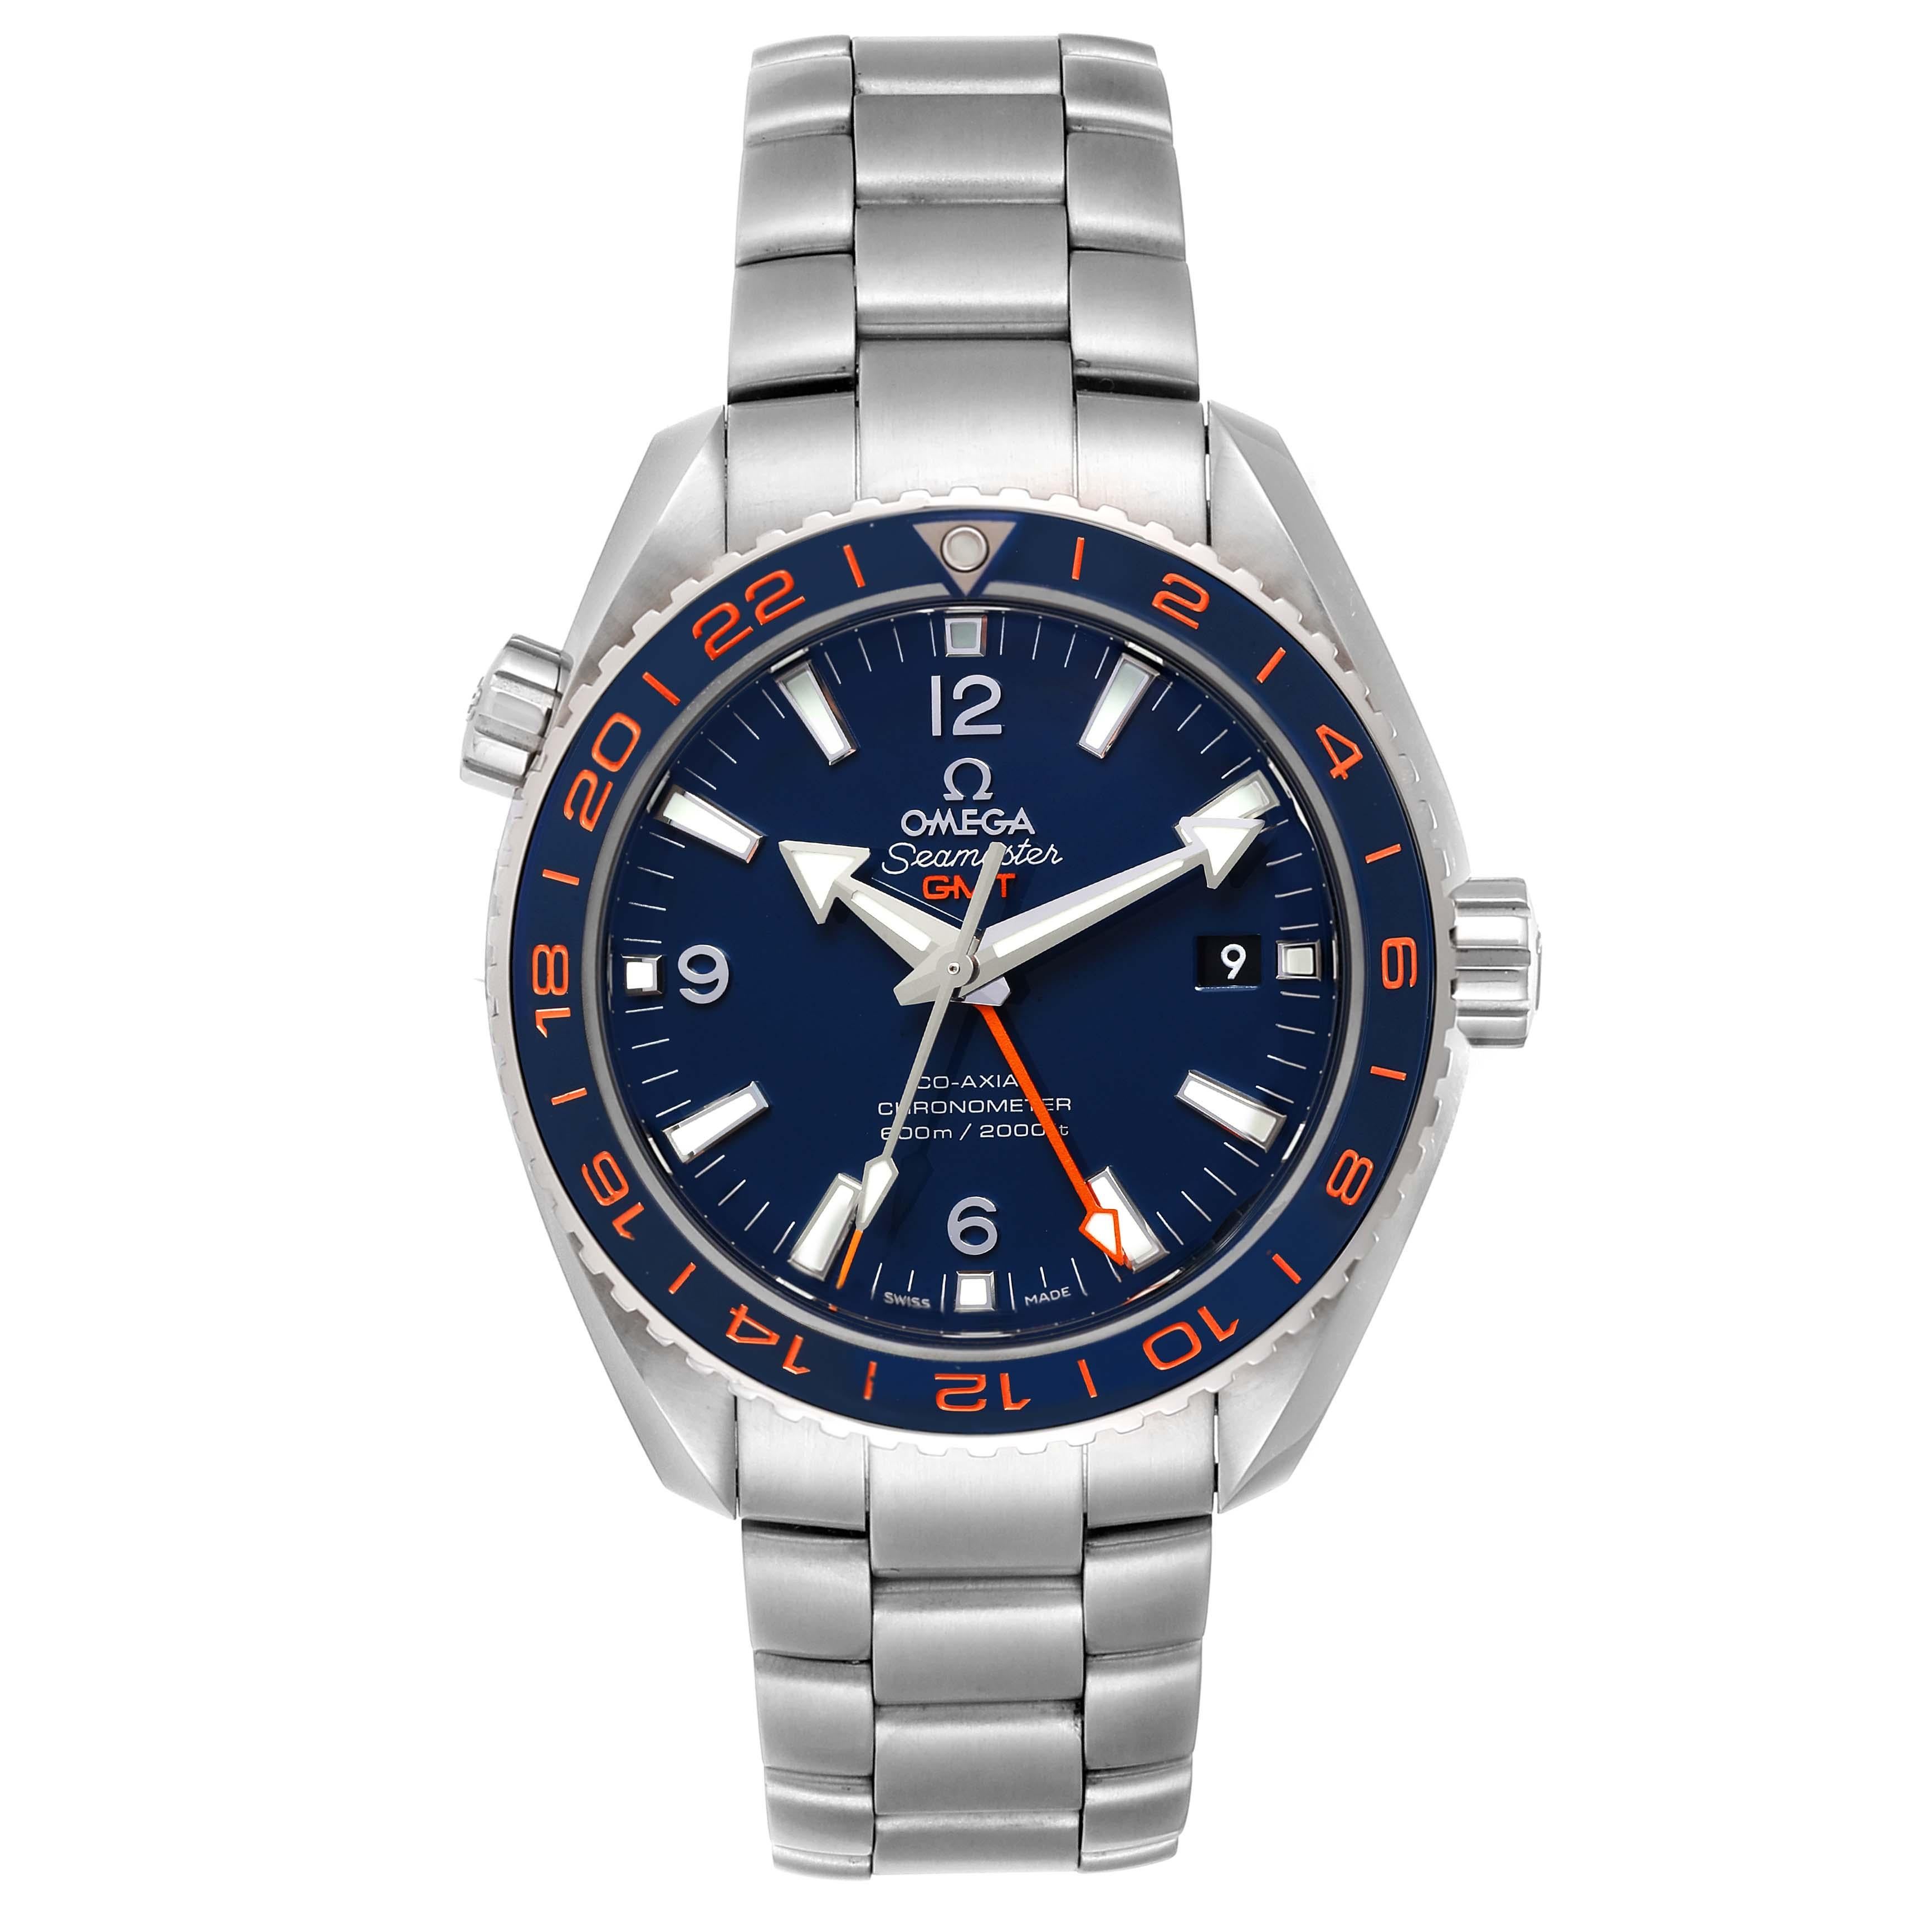 Omega Seamaster Planet Ocean GMT GoodPlanet Mens Watch 232.30.44.22.03.001. Automatic self-winding chronometer movement. GMT with time zone function. Silicon balance-spring on free sprung-balance, 2 barrels mounted in series, automatic winding in